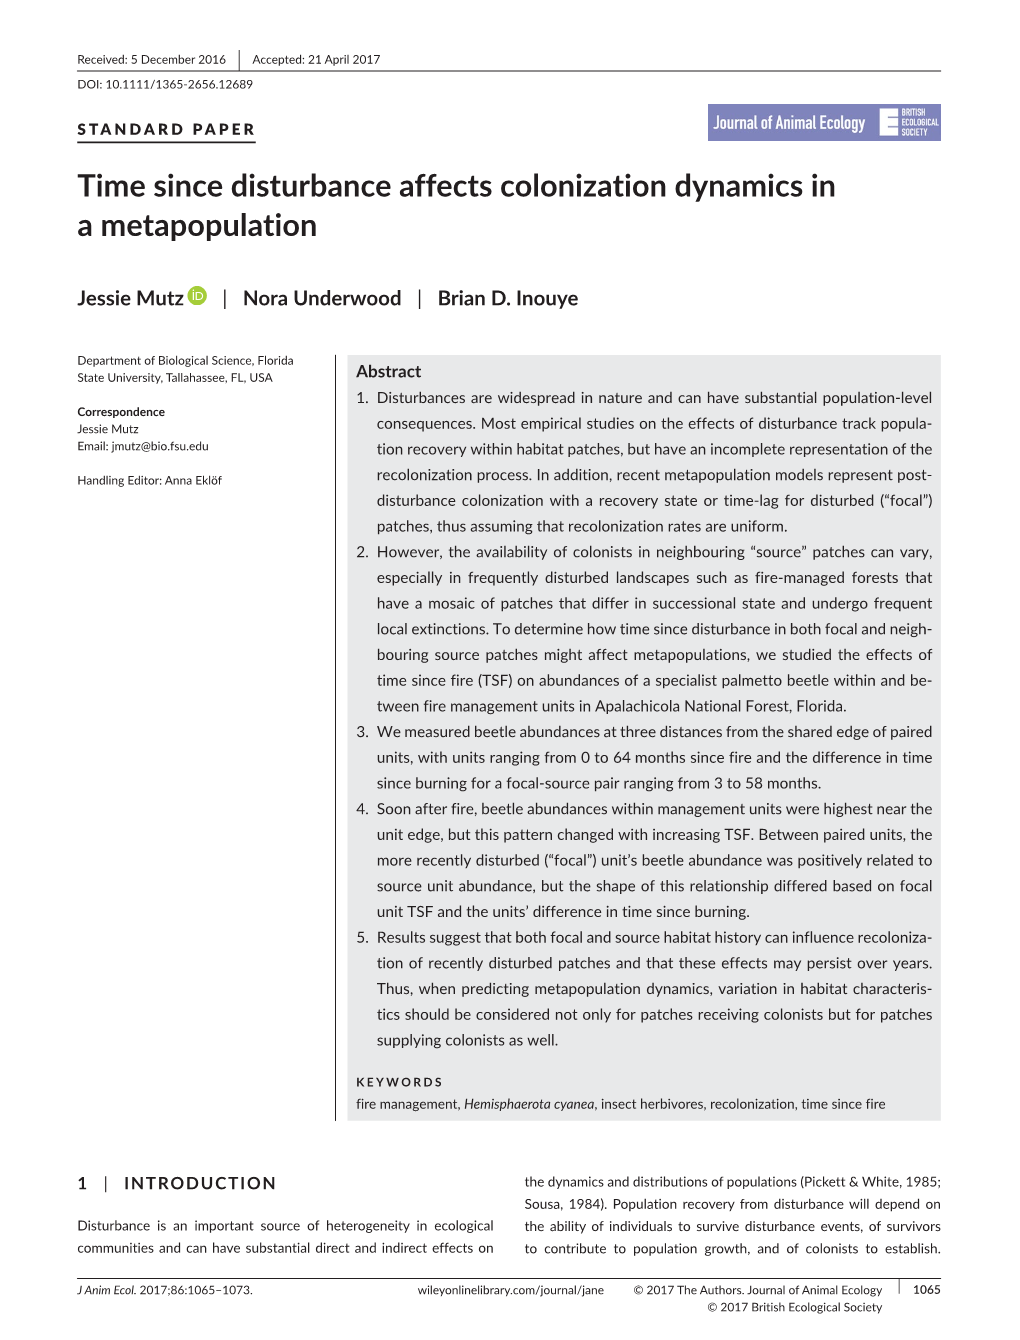 Time Since Disturbance Affects Colonization Dynamics in a Metapopulation